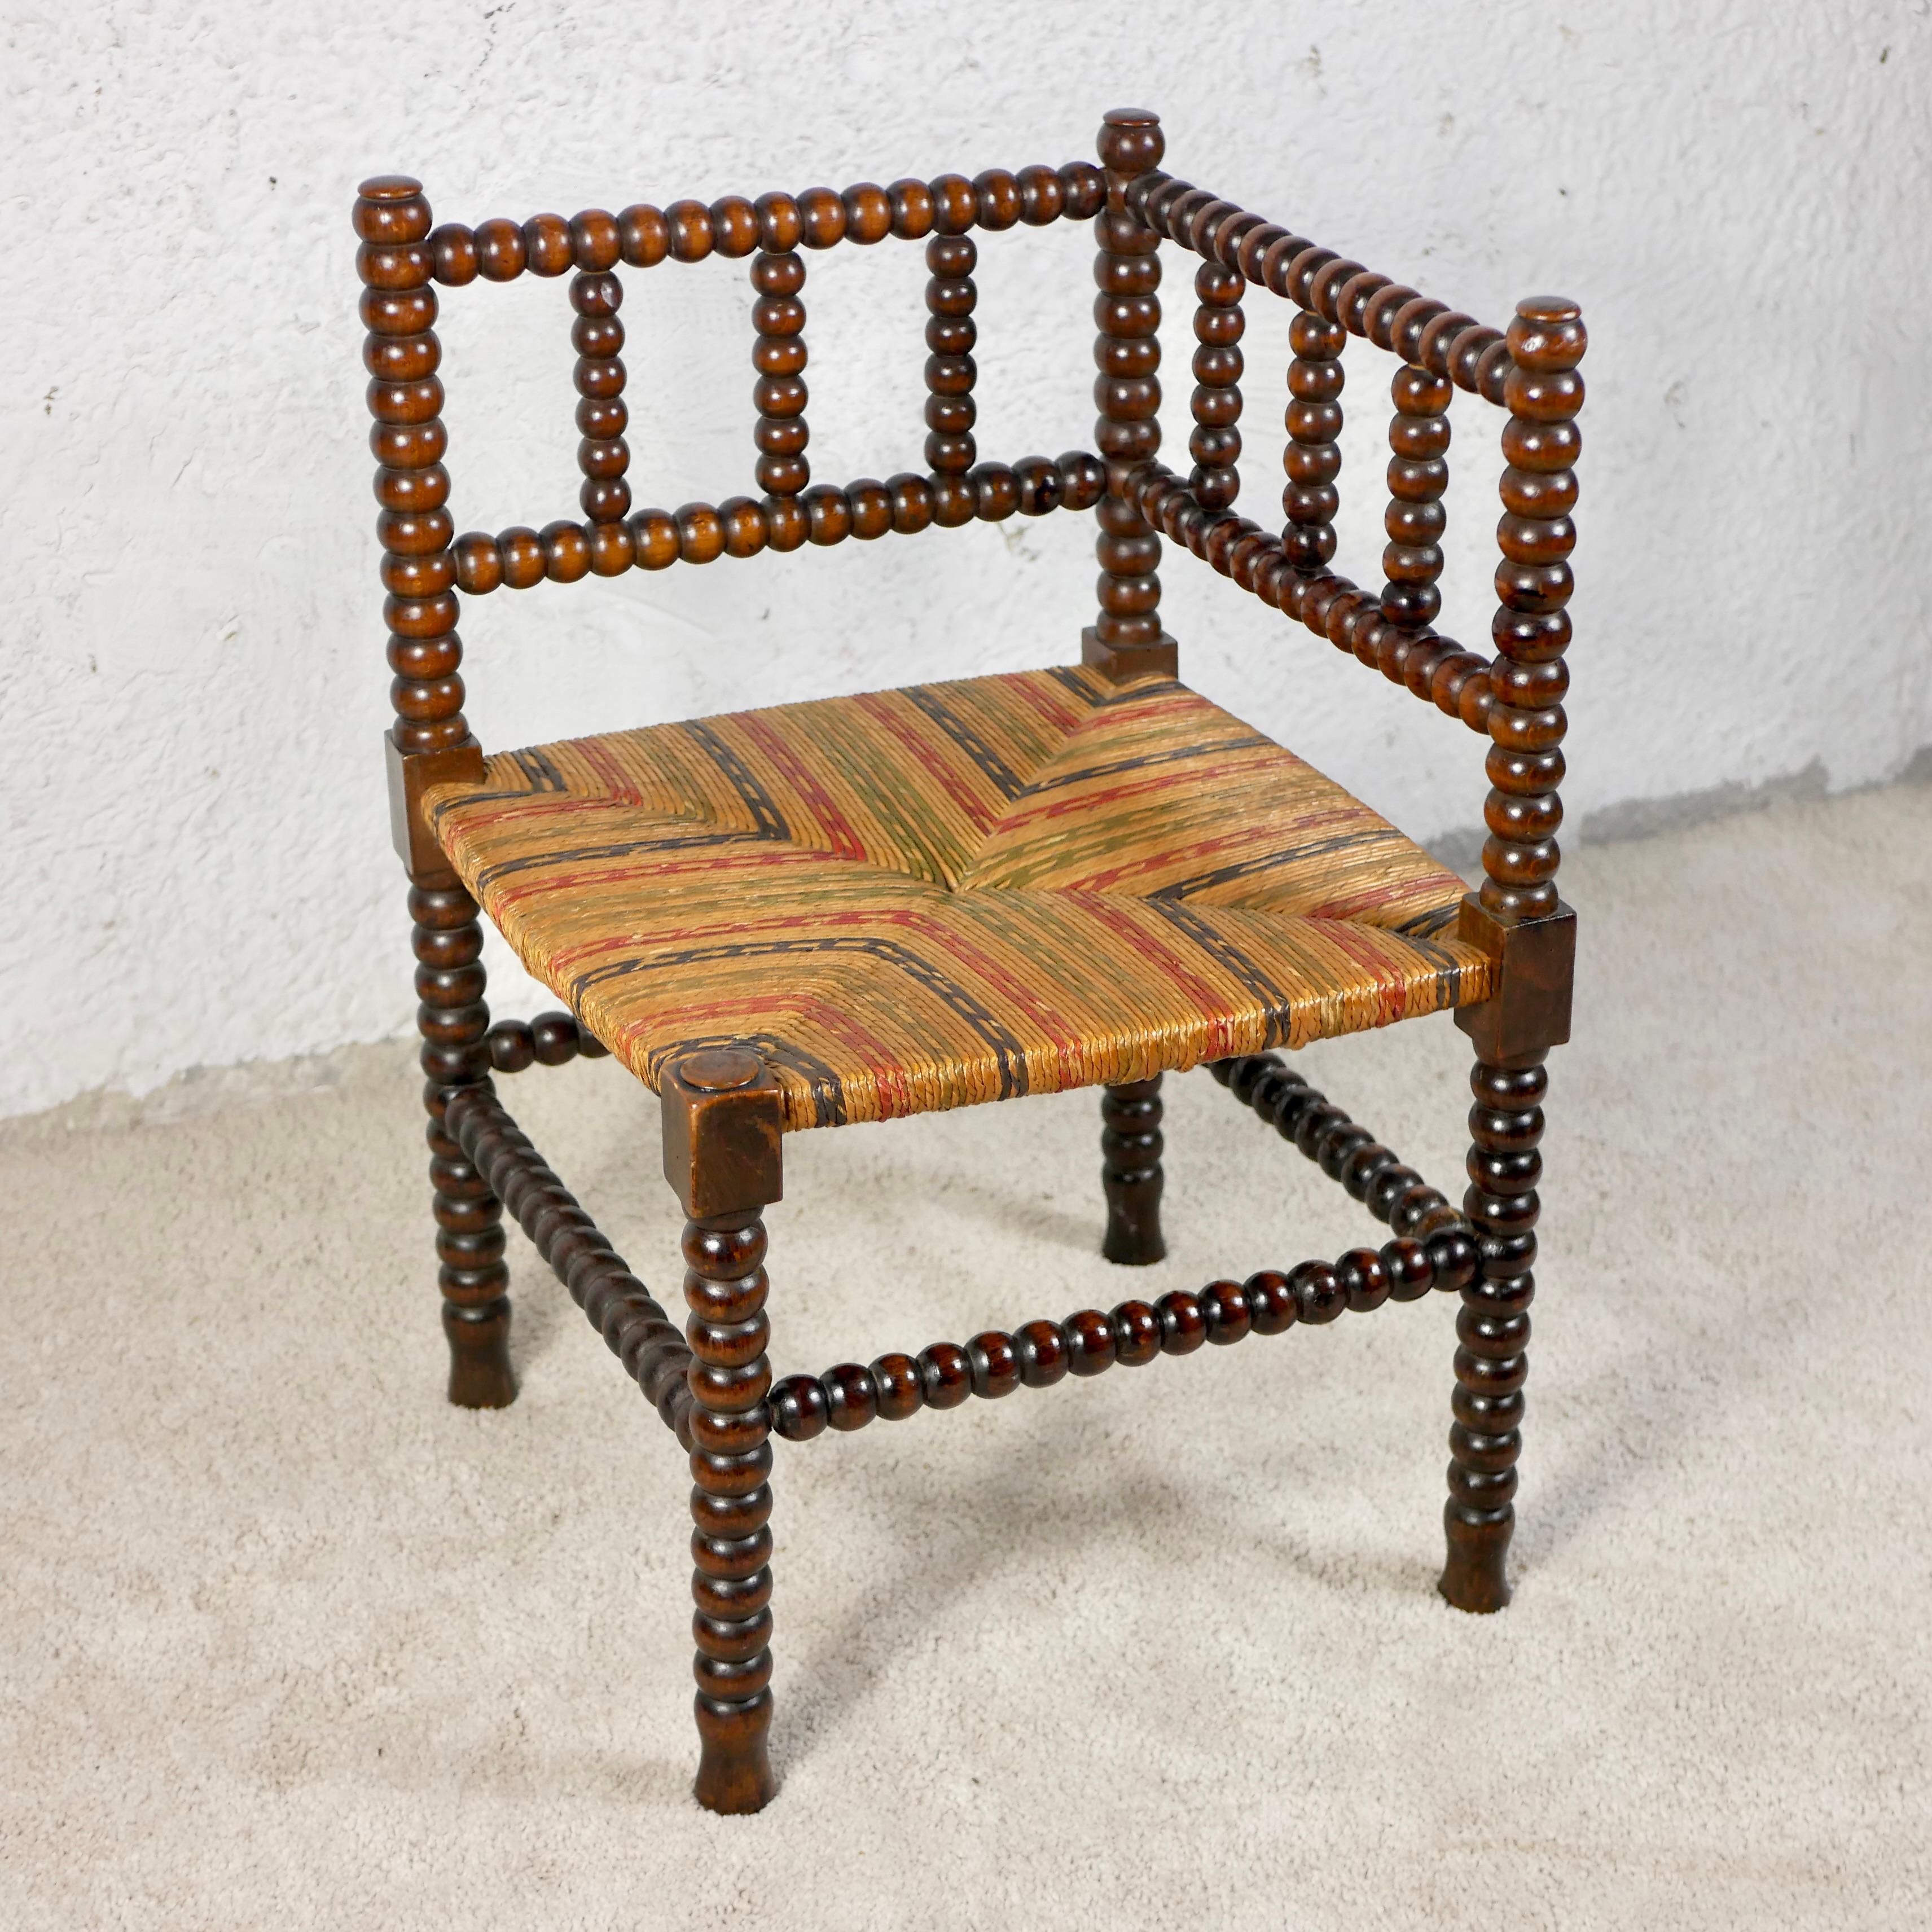 Nice multicolored seat corner chair, also called Bobbin chair, made in France between the second half of the 19th century and the beginning of the 20th century. 
Bobbin chairs were common pieces of furniture especially in the countryside and were